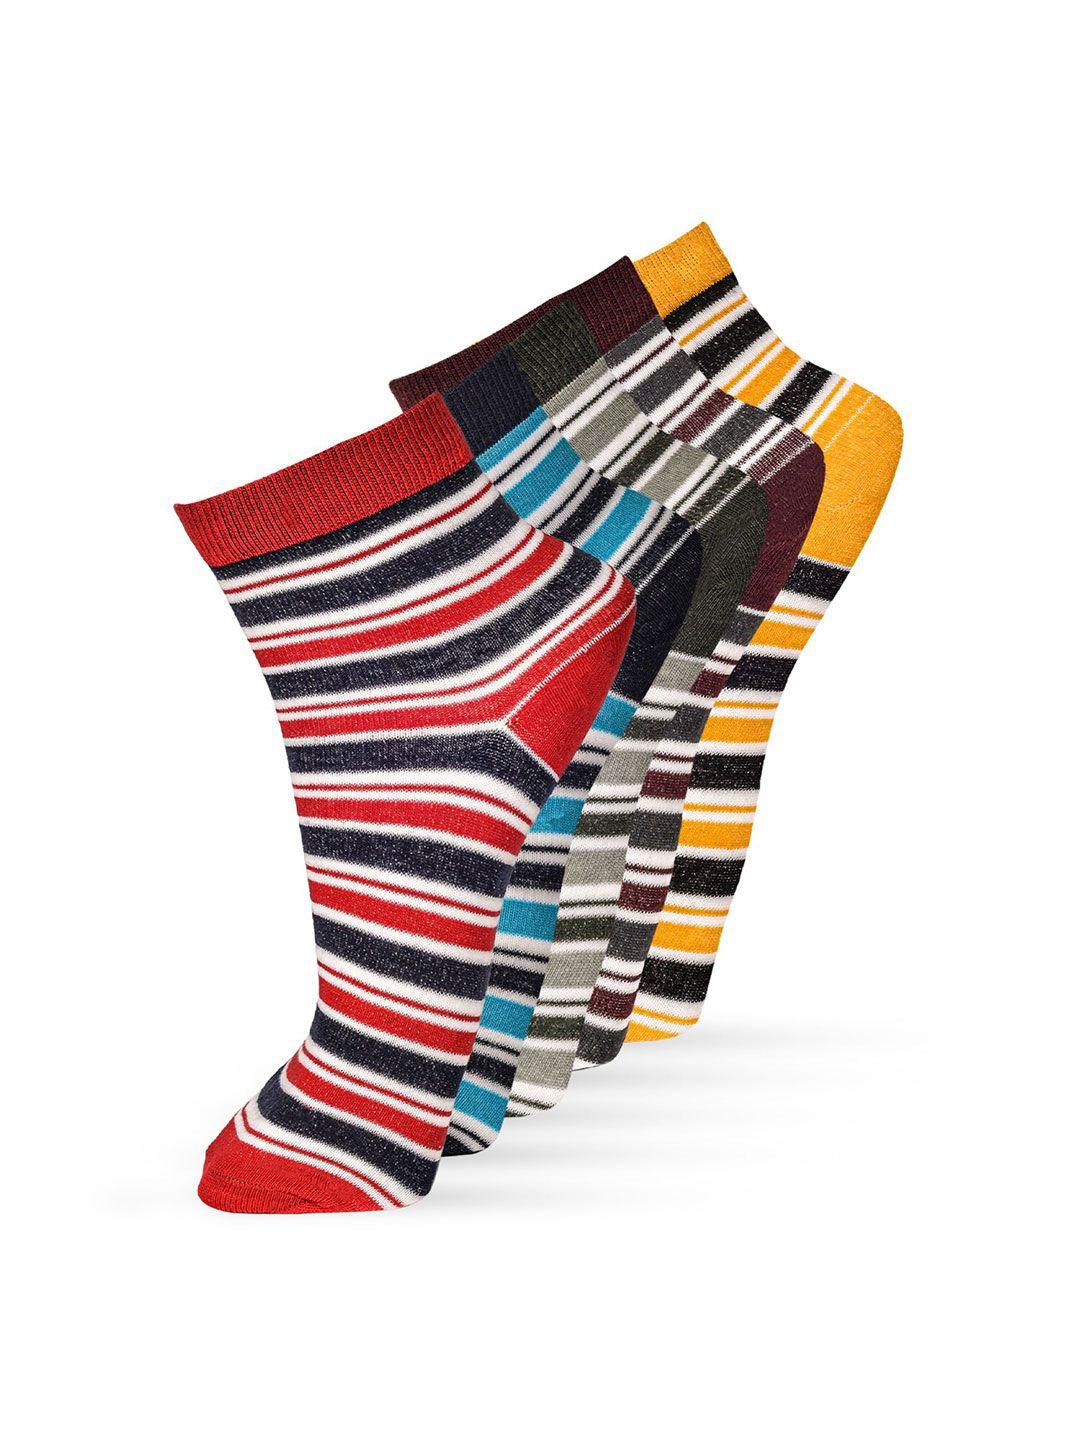 frenchie-men-pack-of-5-assorted-striped-cotton-ankle-length-socks